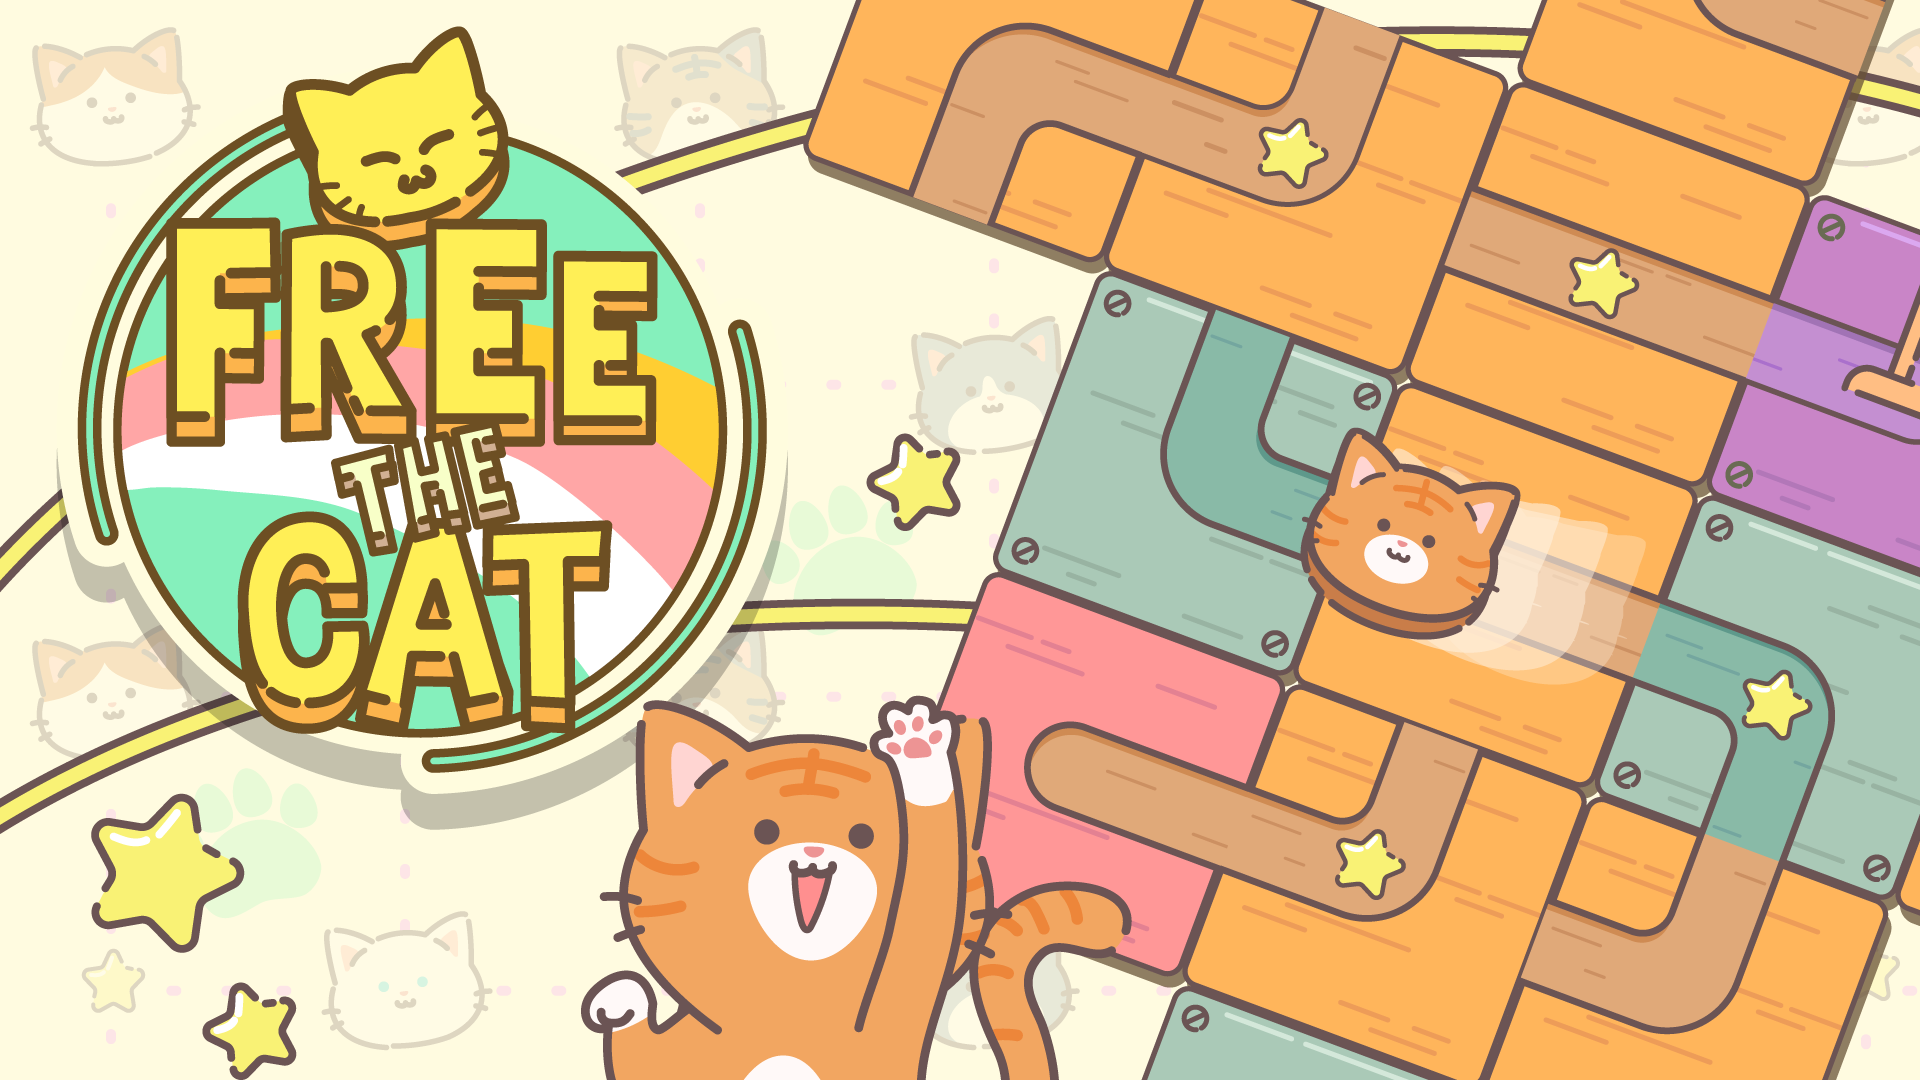 Free The Cat Game Image